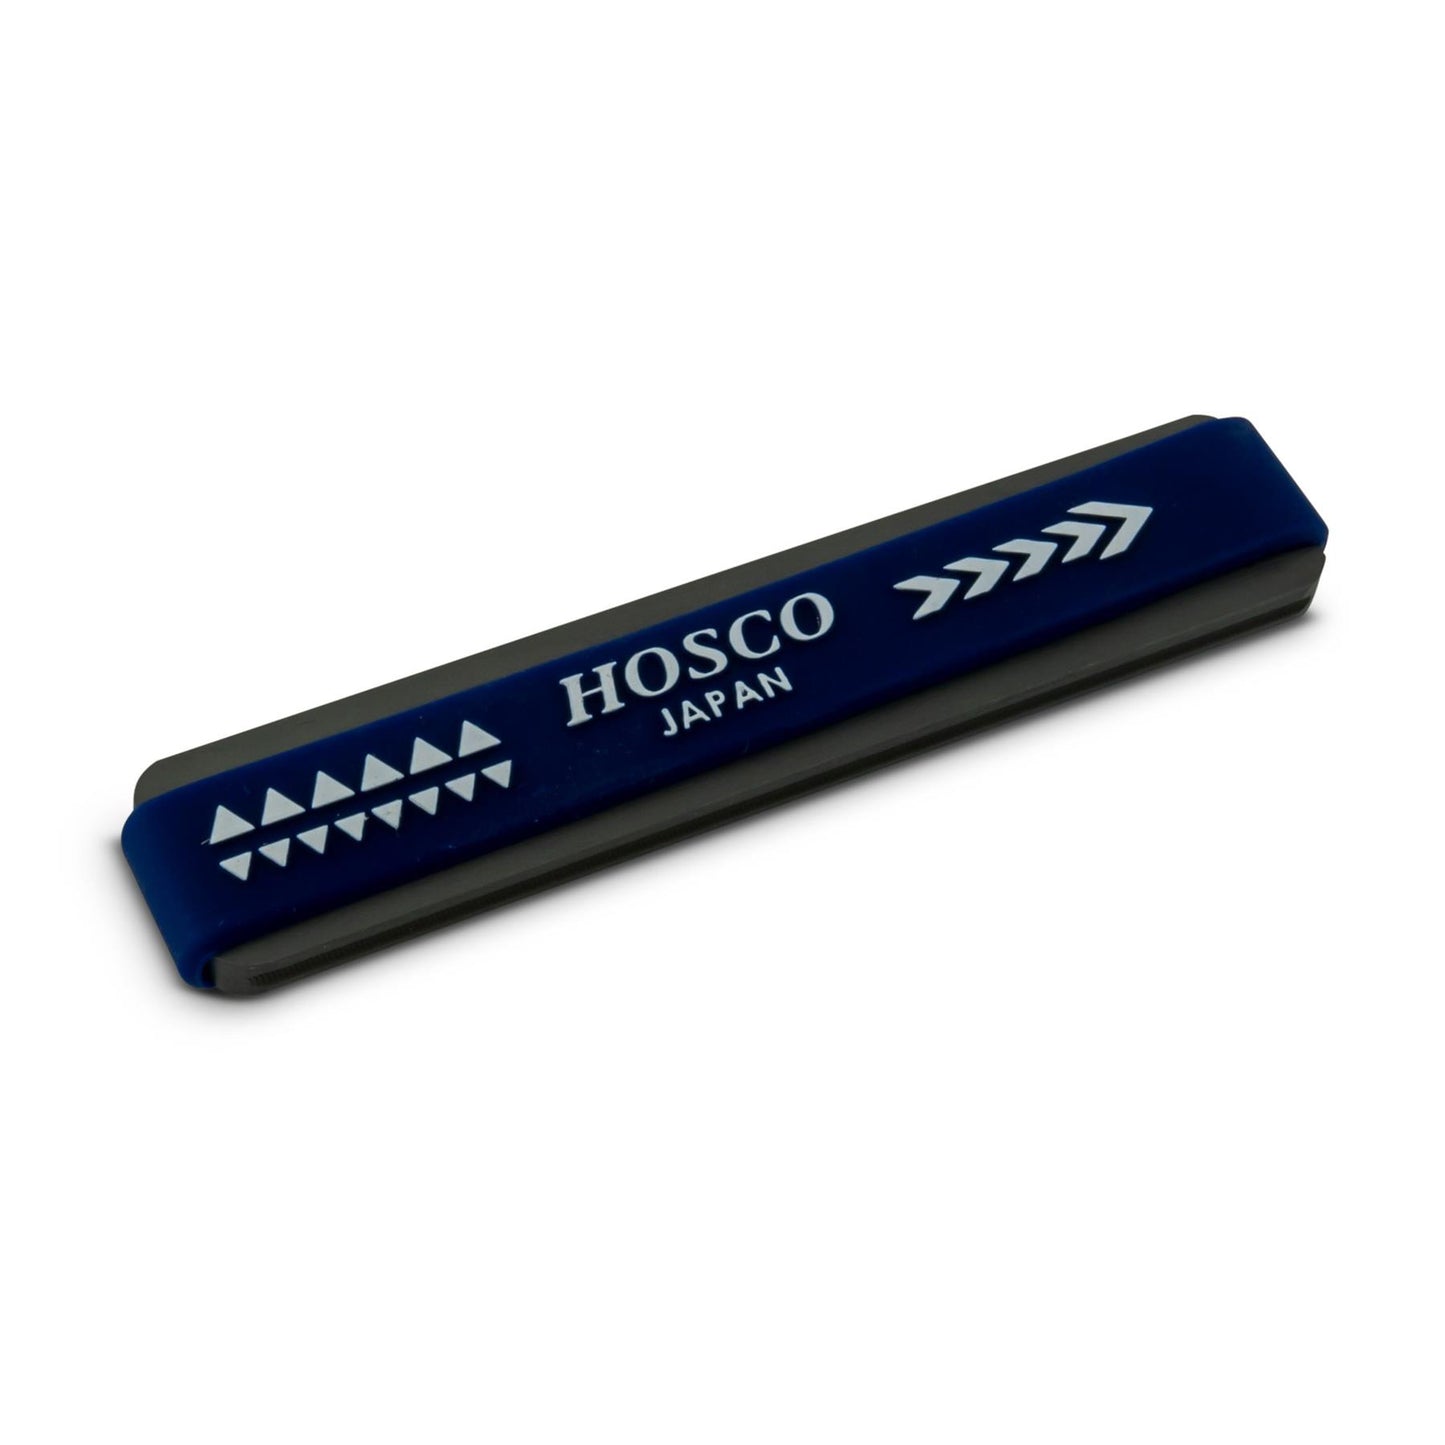 Hosco Compact Fret Crowning File - Small (Blue)